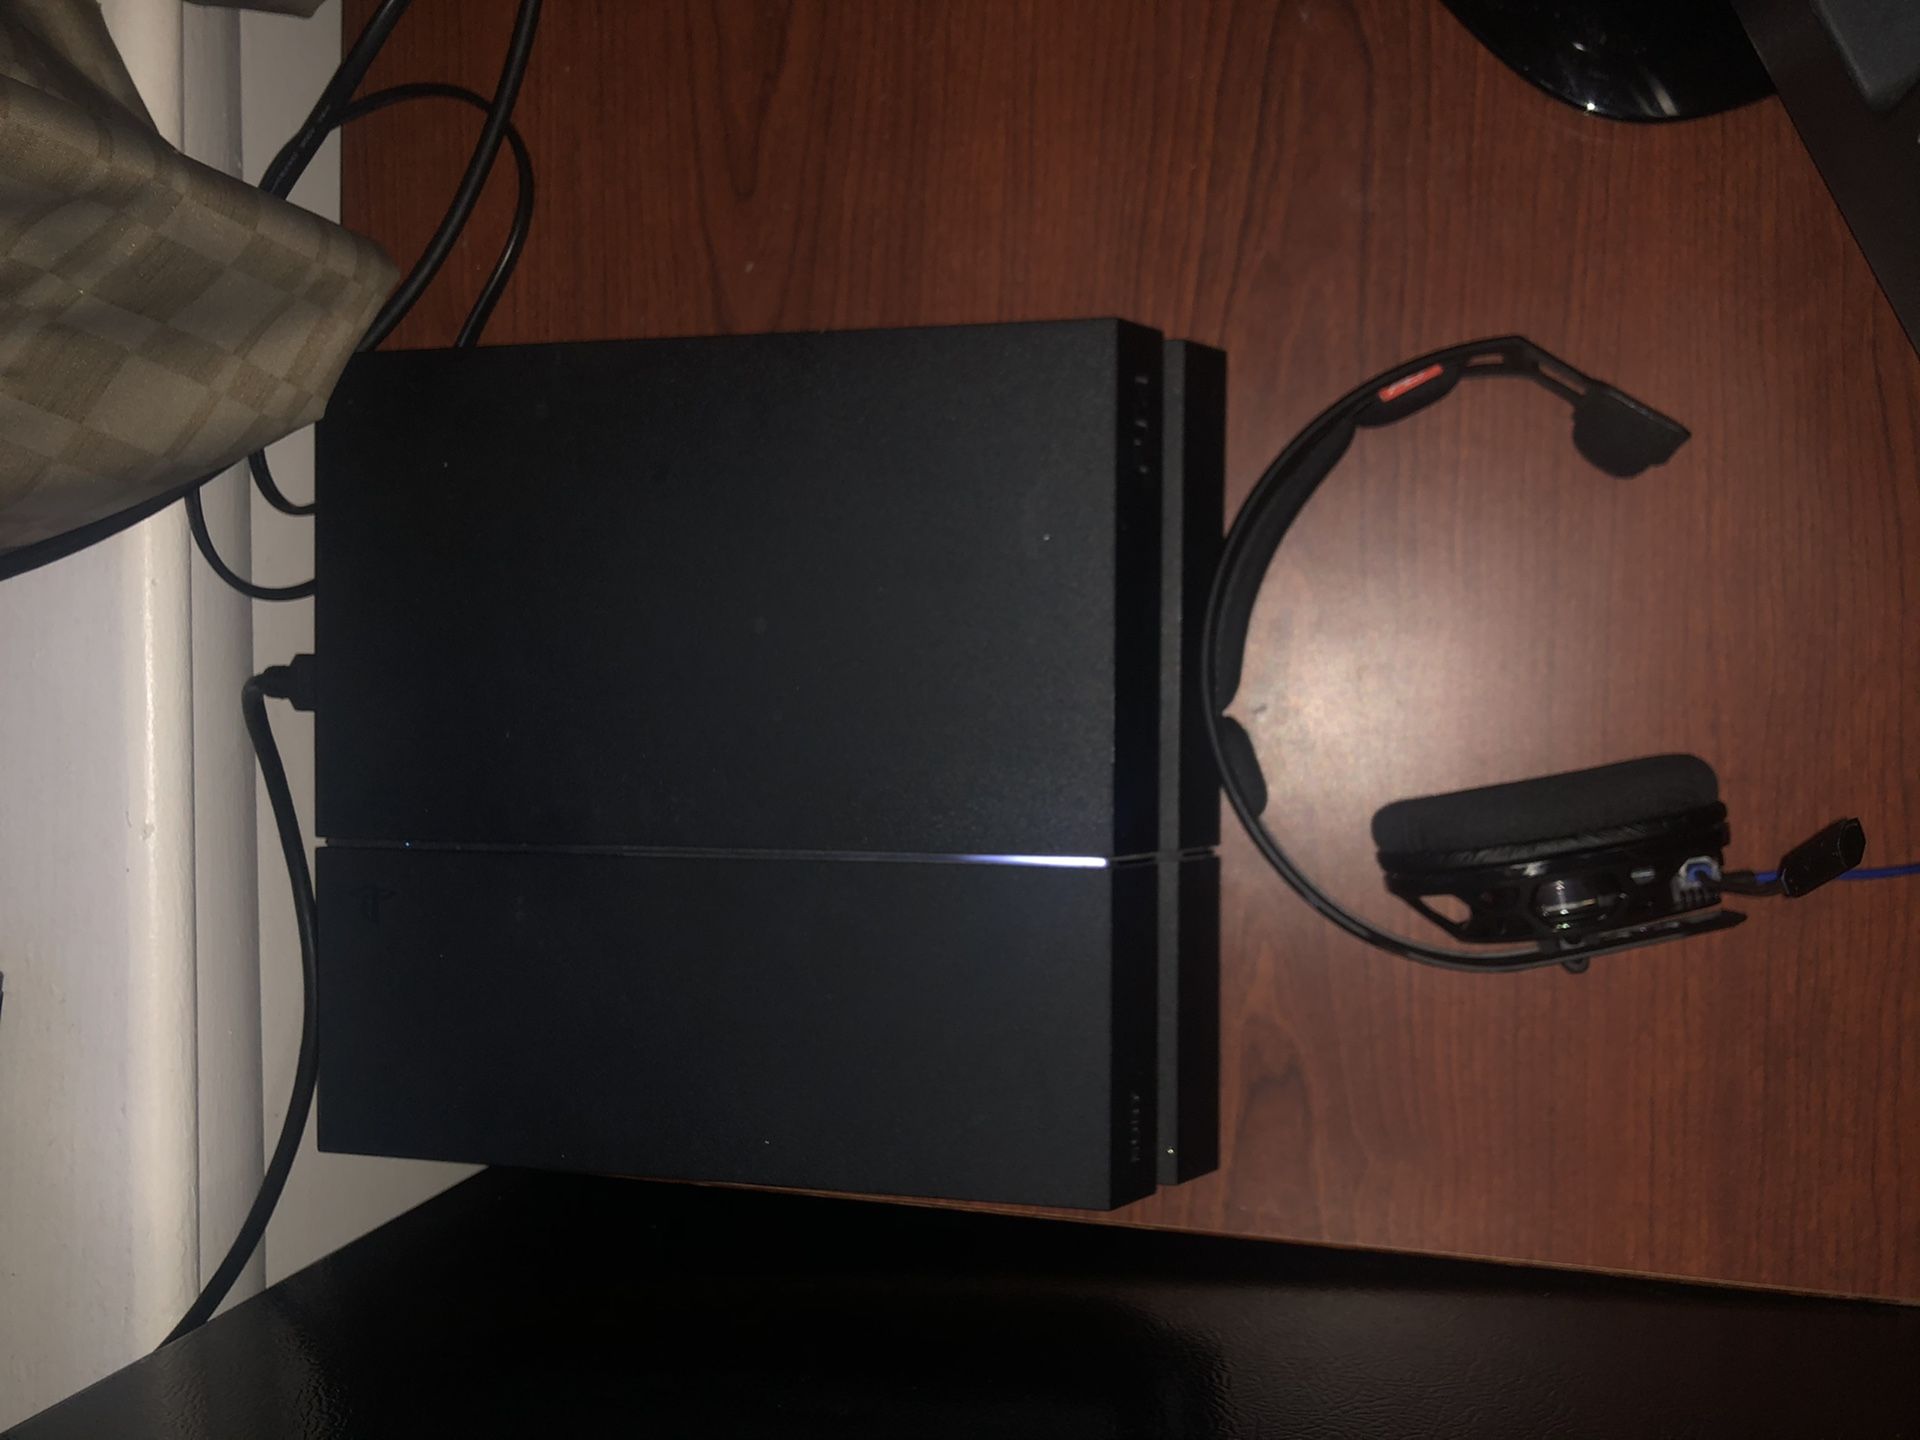 PS4 & Headset & Controller (w/ long usb)